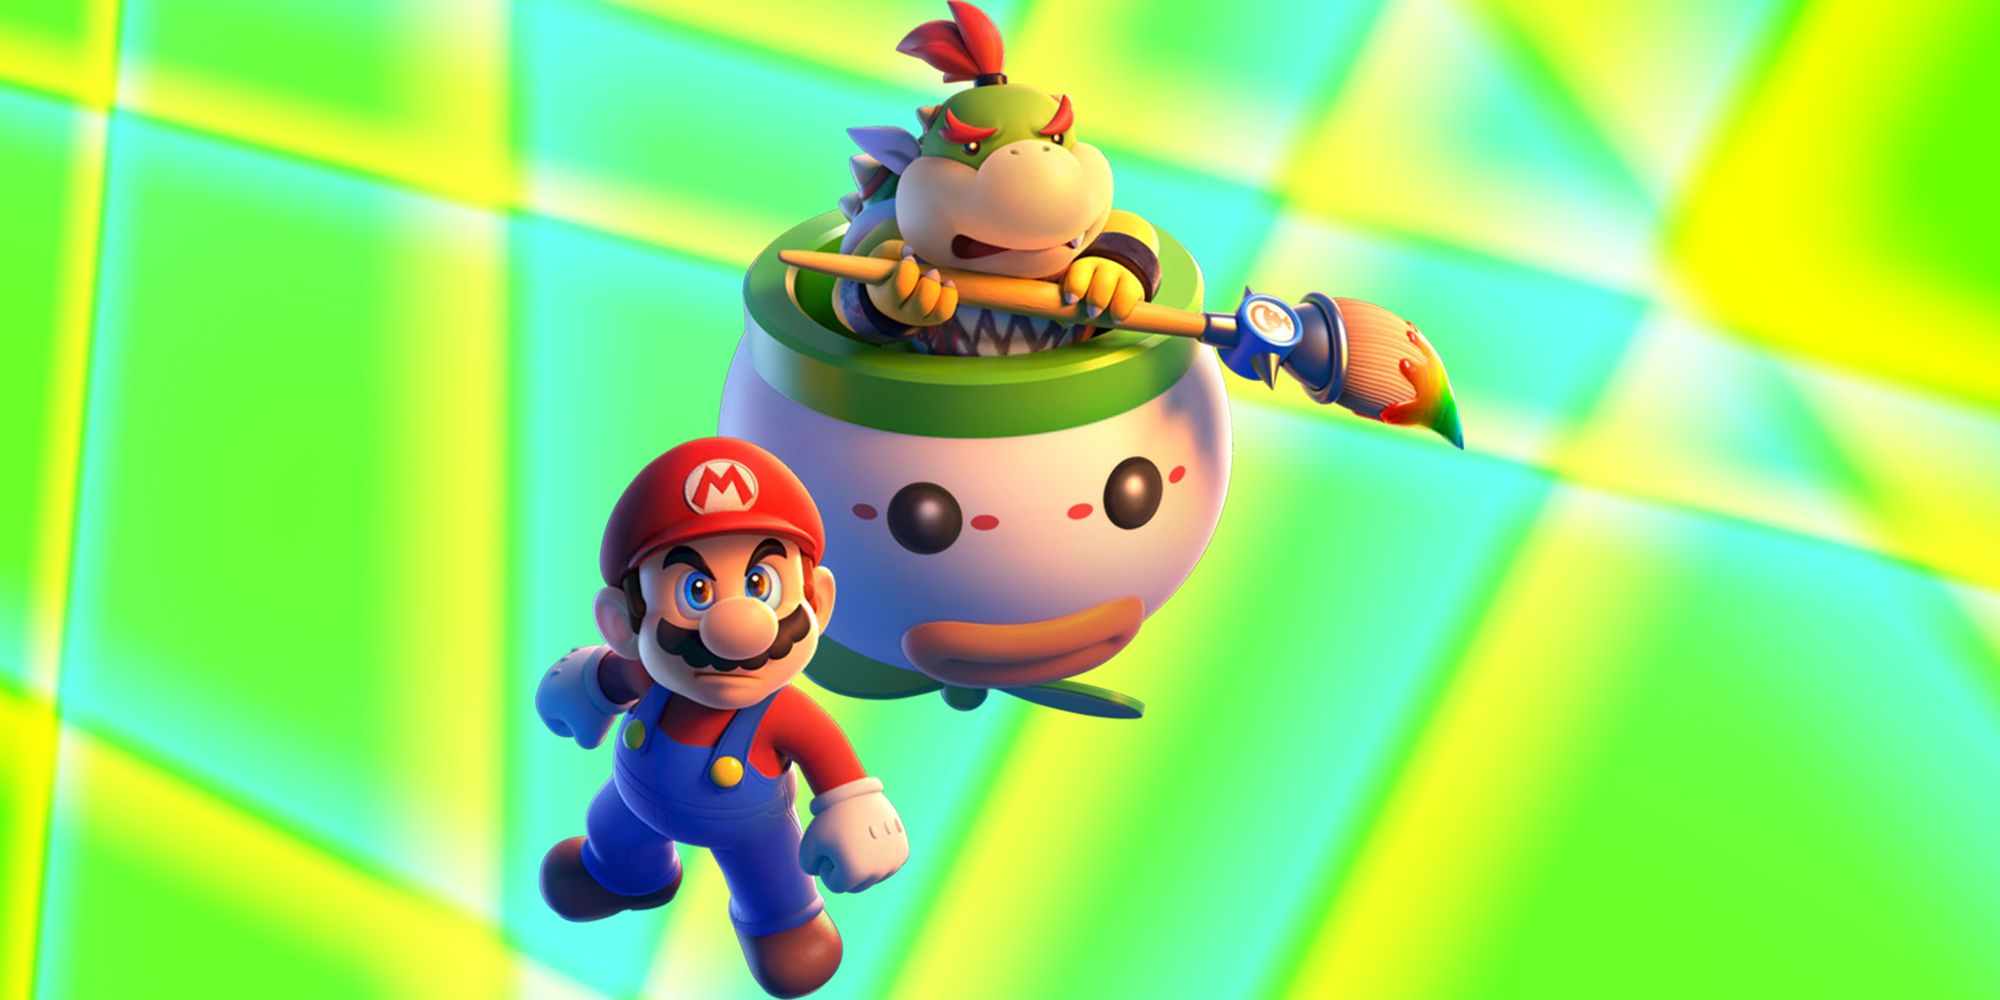 Bowser's Fury' adds open-world cat-themed hi-jinx to 'Super Mario 3D World'  - The Washington Post